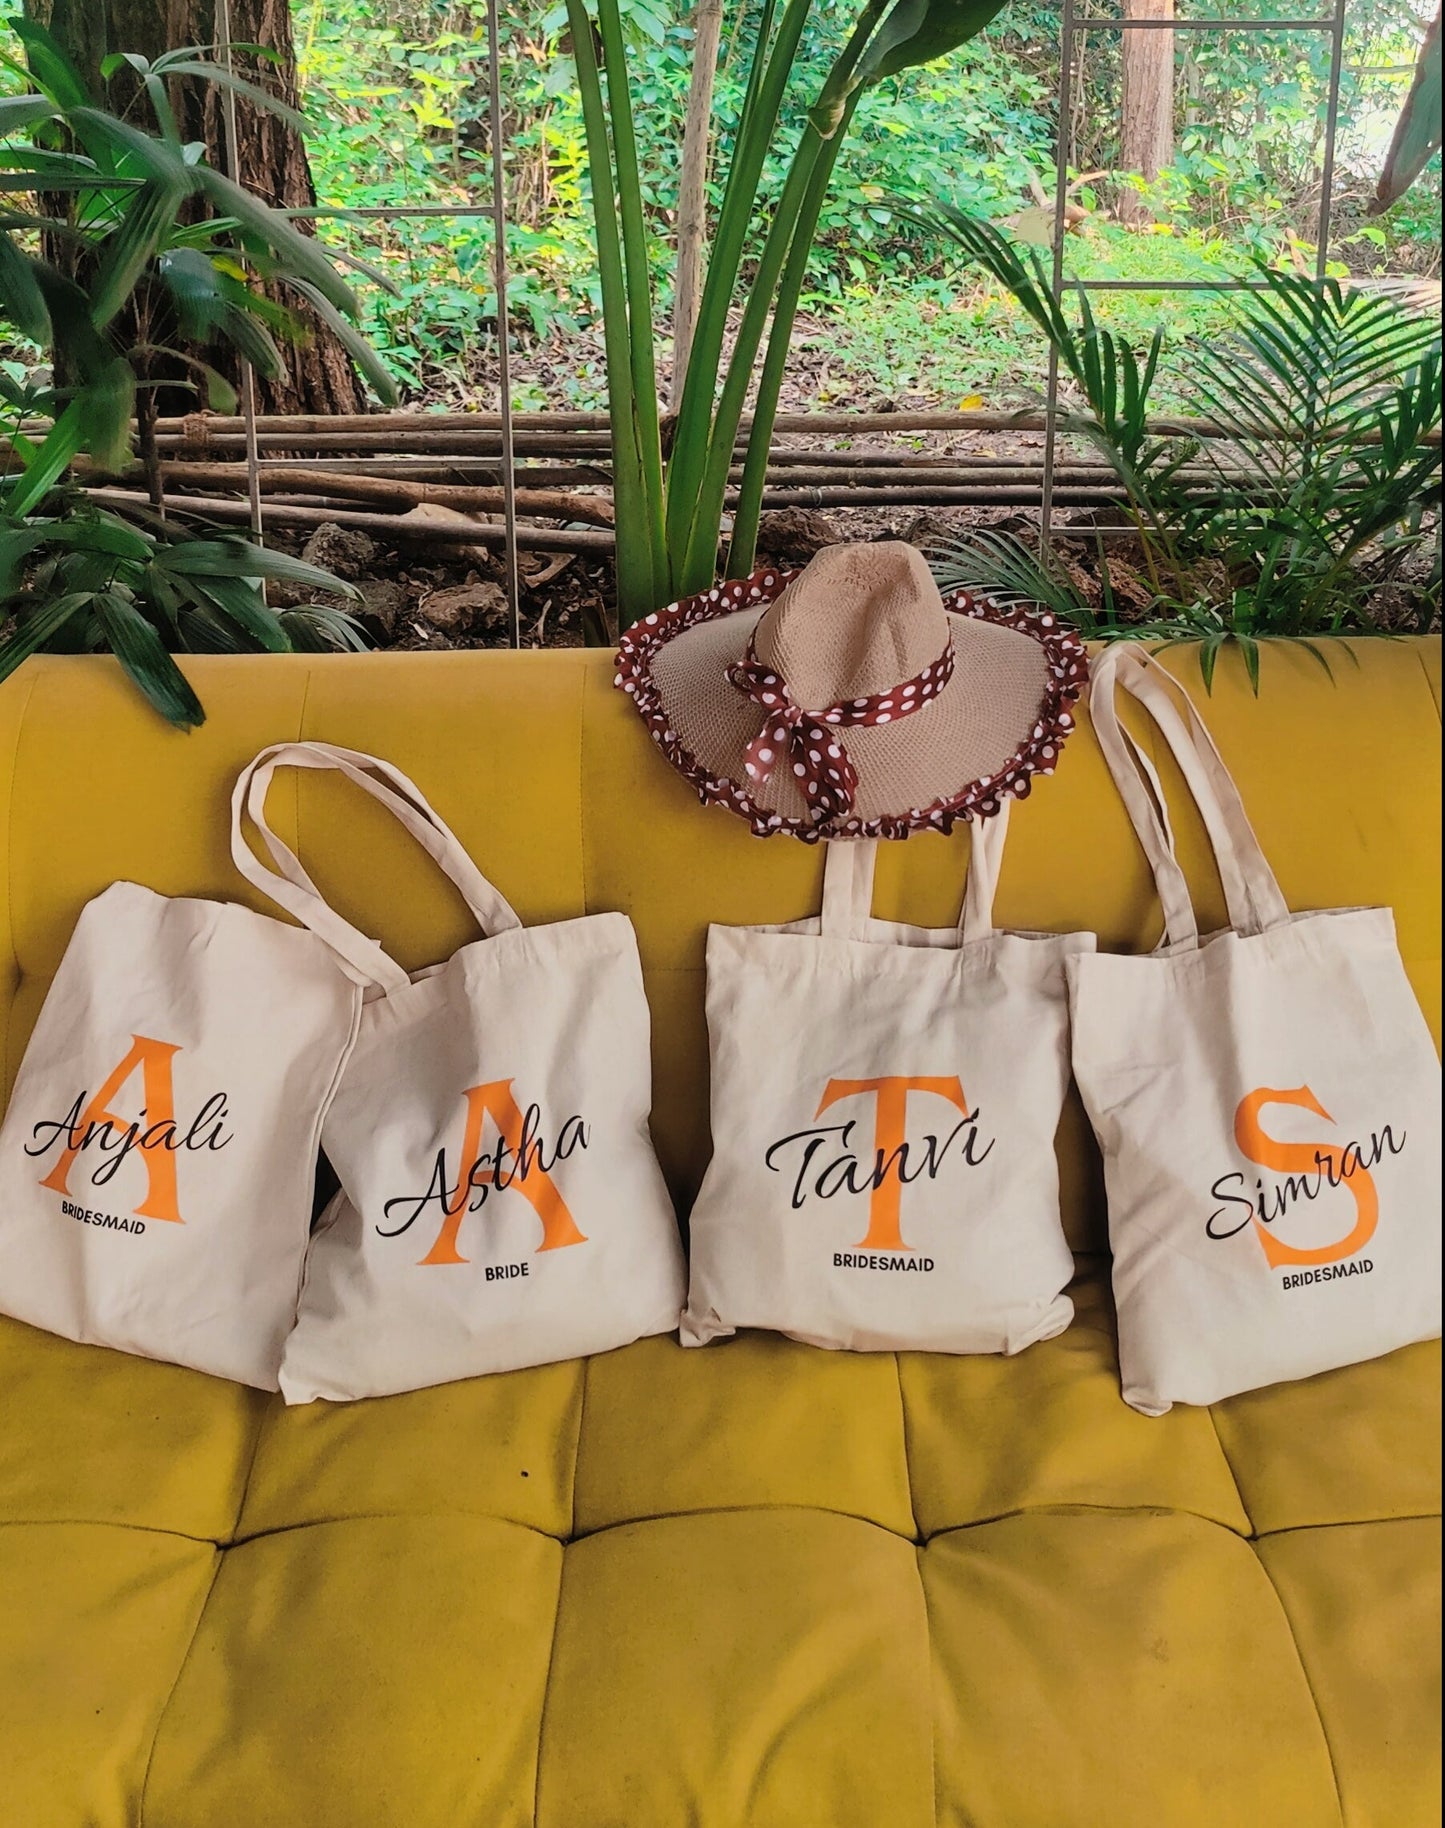 Personalized Cotton Bags